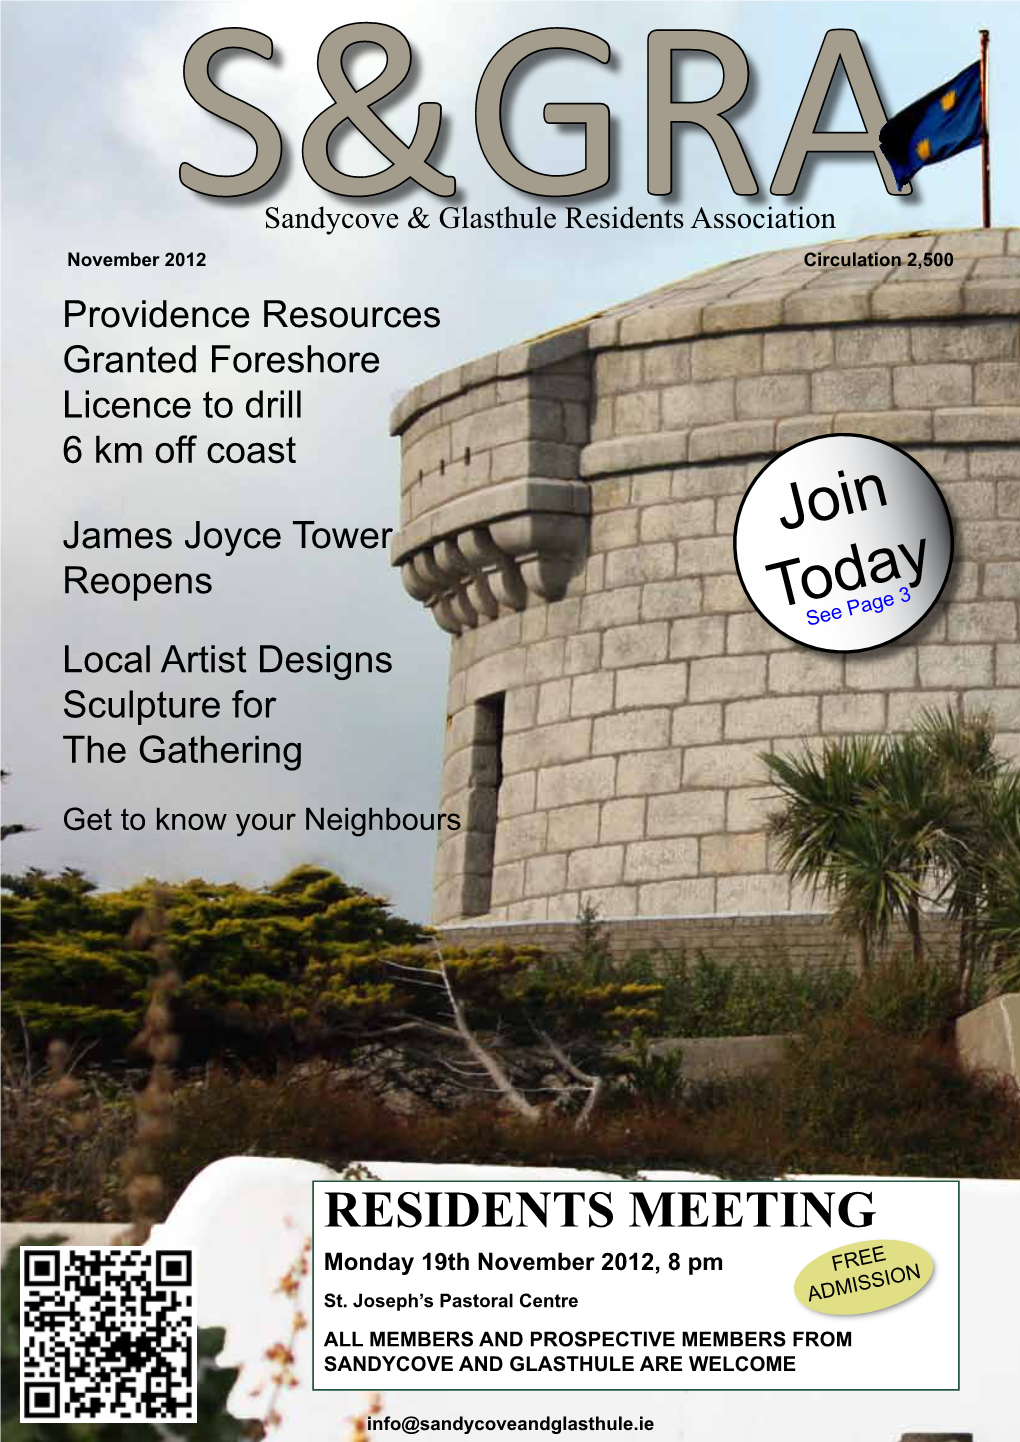 Sandycove and Glasthule Residents Association Newsletter November 2012 Ask Not What Your Association Can Do for You But